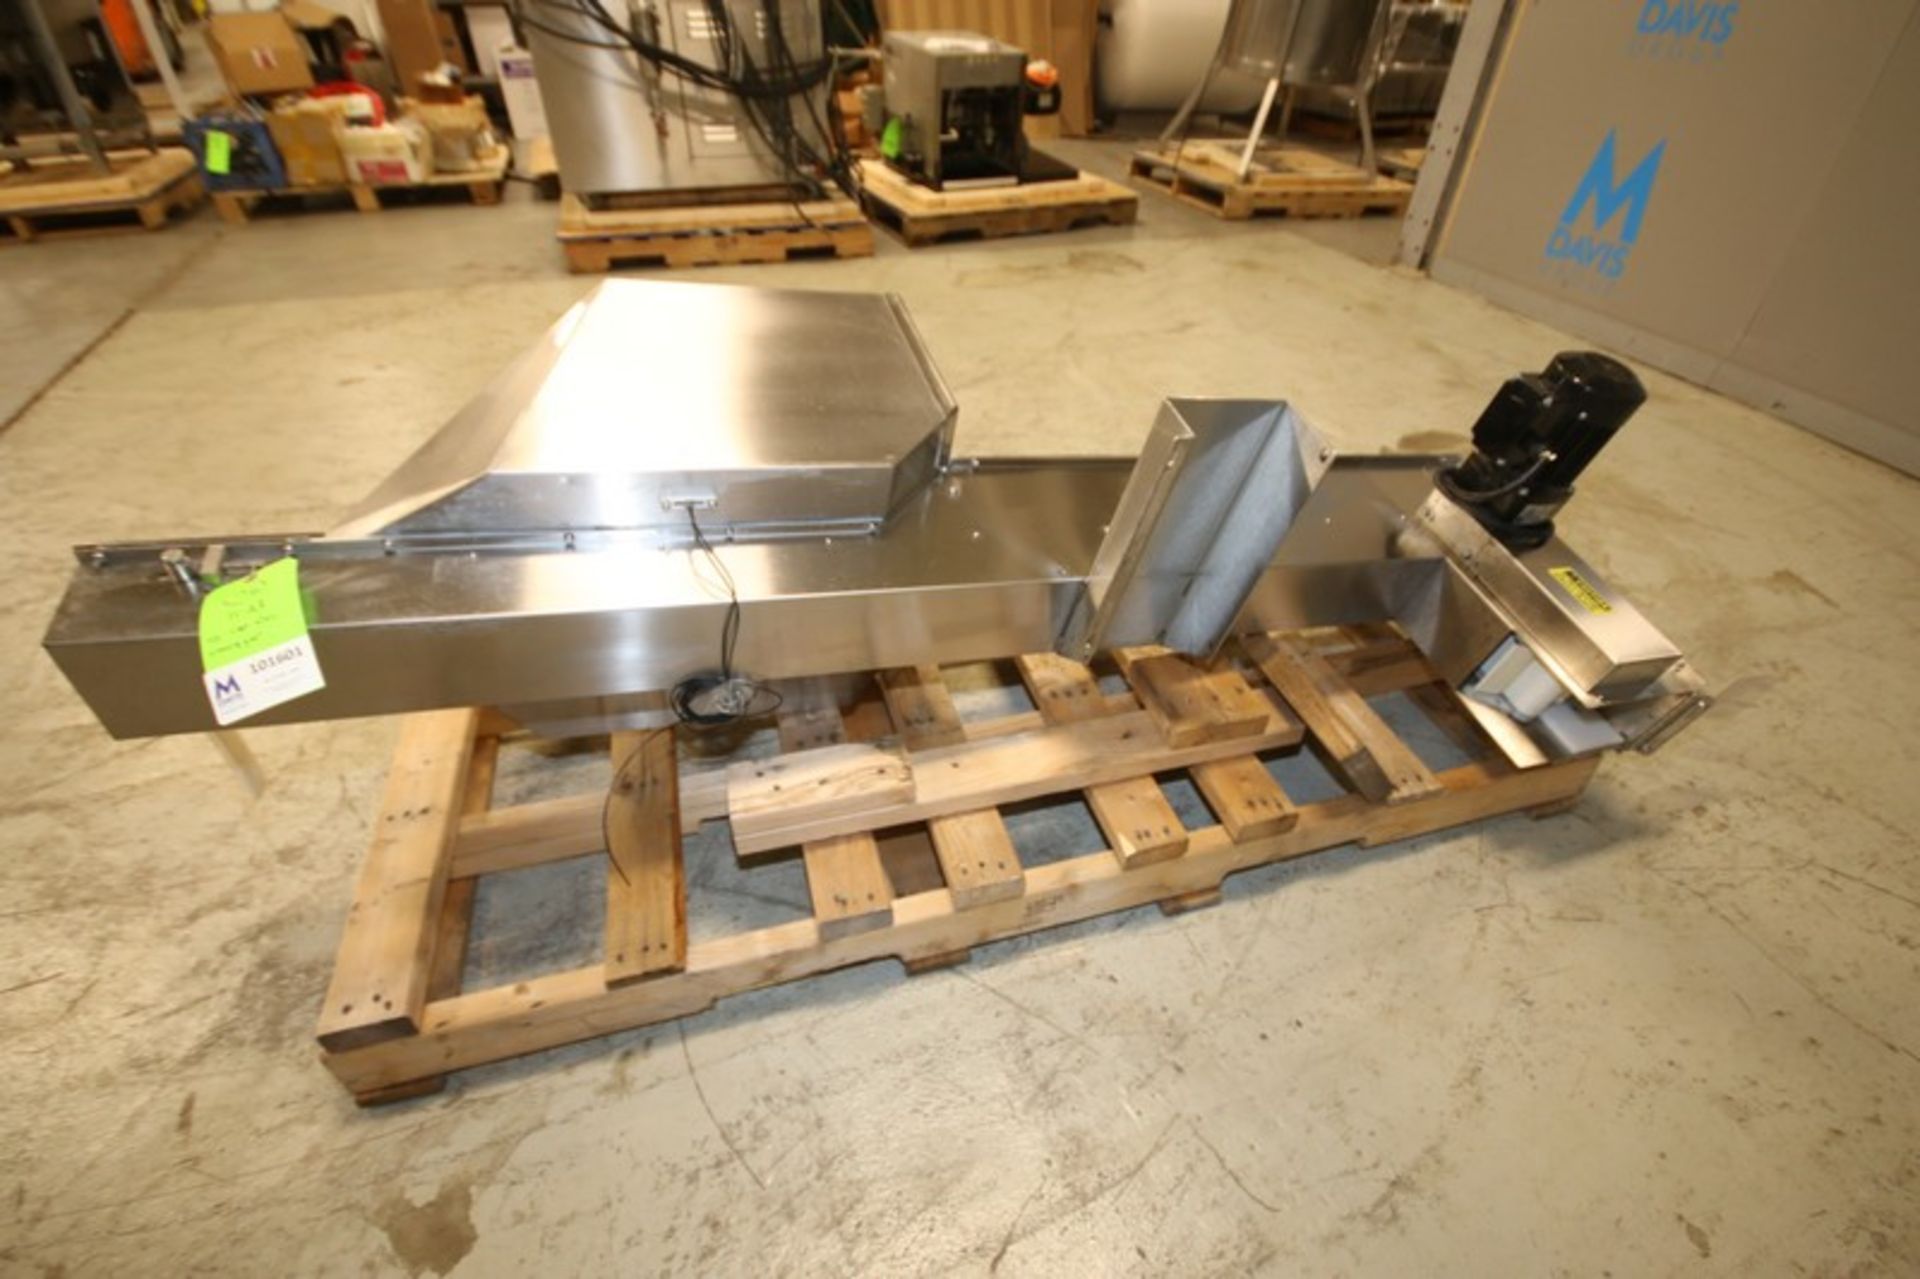 72" H S/S Cap Elevated Conveyor with 4" Conveyor with 3.5" Fights, 17" W x 12" L x 26" D Hopper with - Image 4 of 6